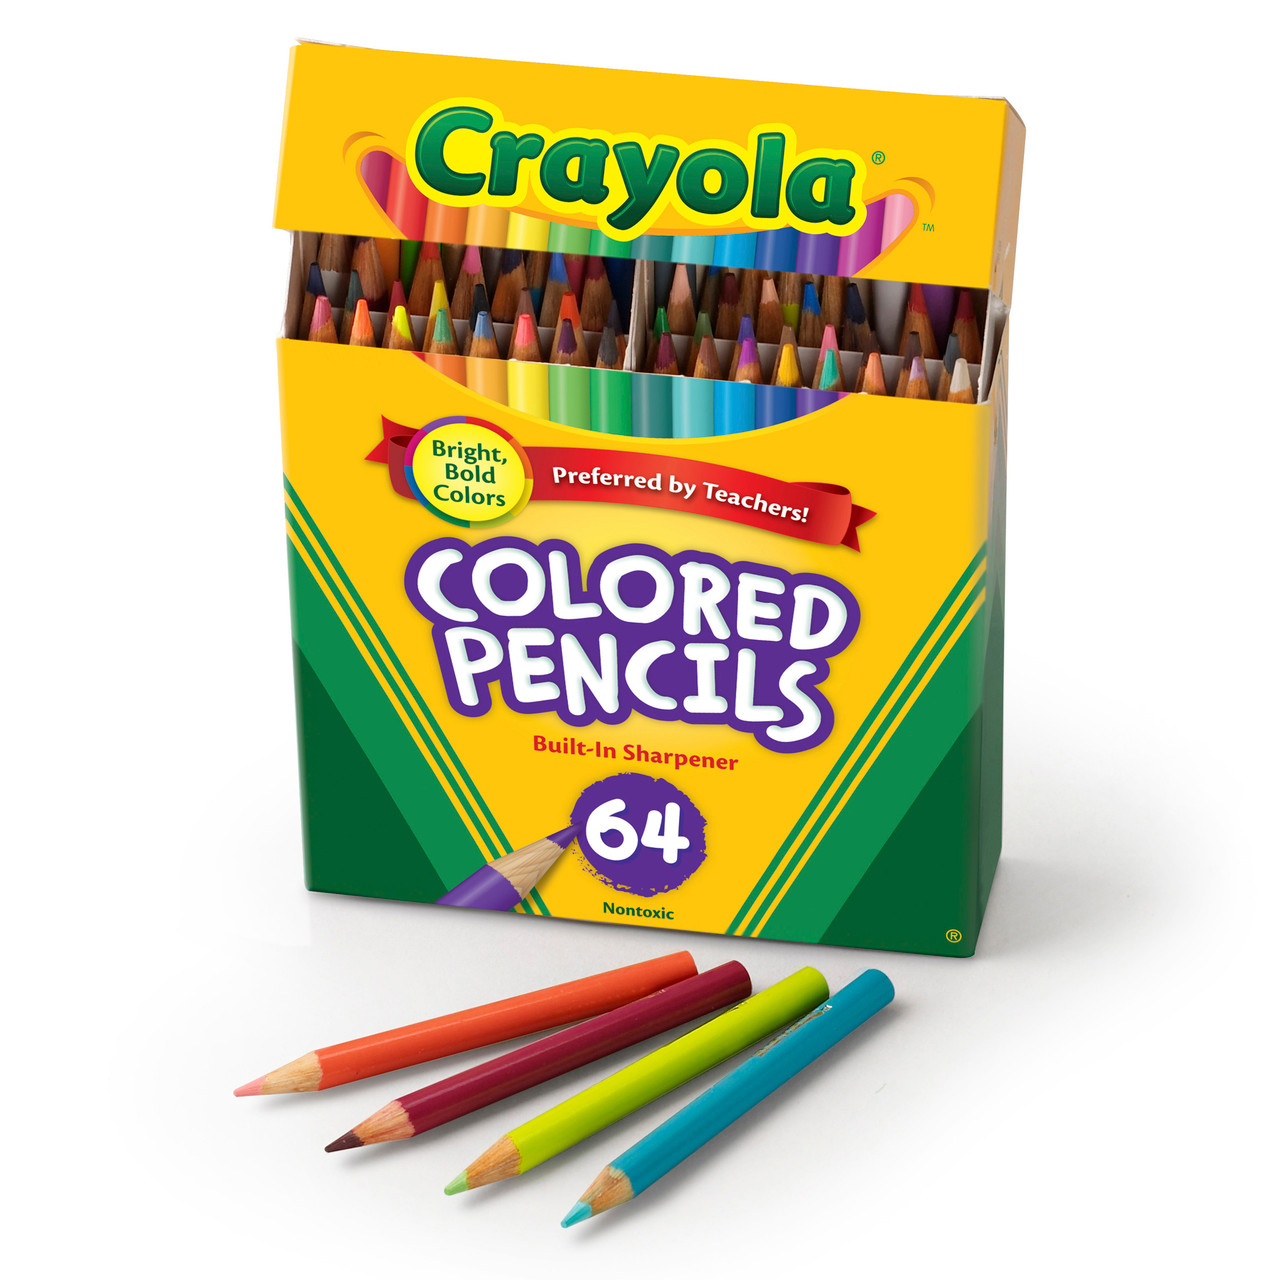 Crayola Adult Coloring Gift Set Includes 100 Count Colored Pencils